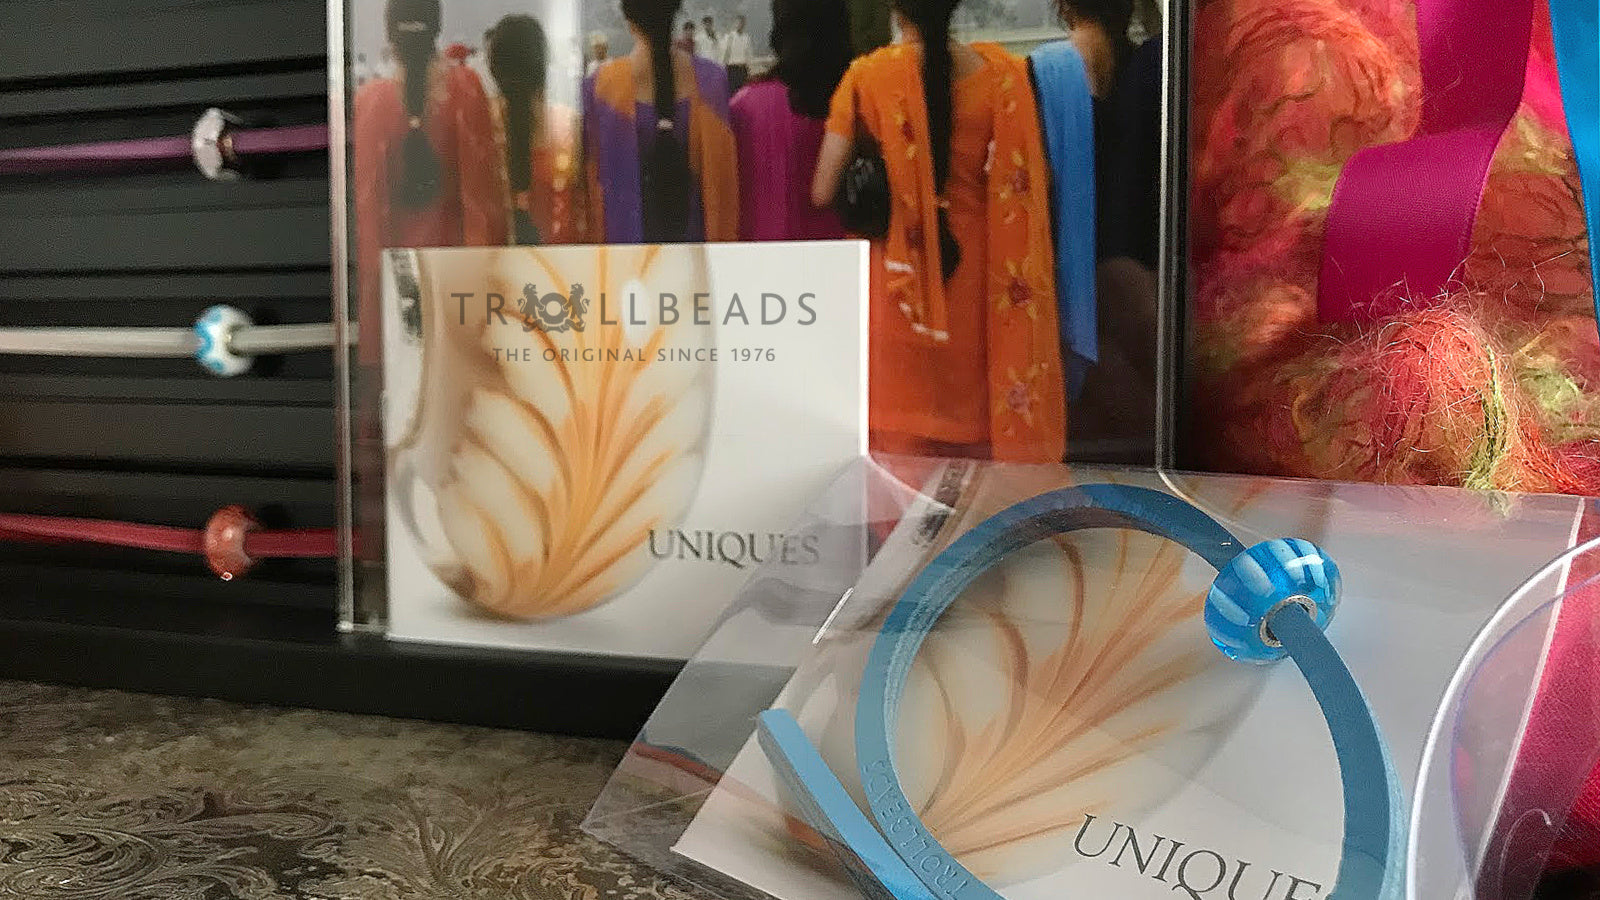 Trollbeads UNIQUES are one-of-a-kind glass beads handmade individually by 100% artisan-owned workshops in Tibet, India, Malawi and Lithuania. The UNIQUES glass beads offered at Suzie Q Studio also include a colour-coordinated Trollbeads leather bracelet.